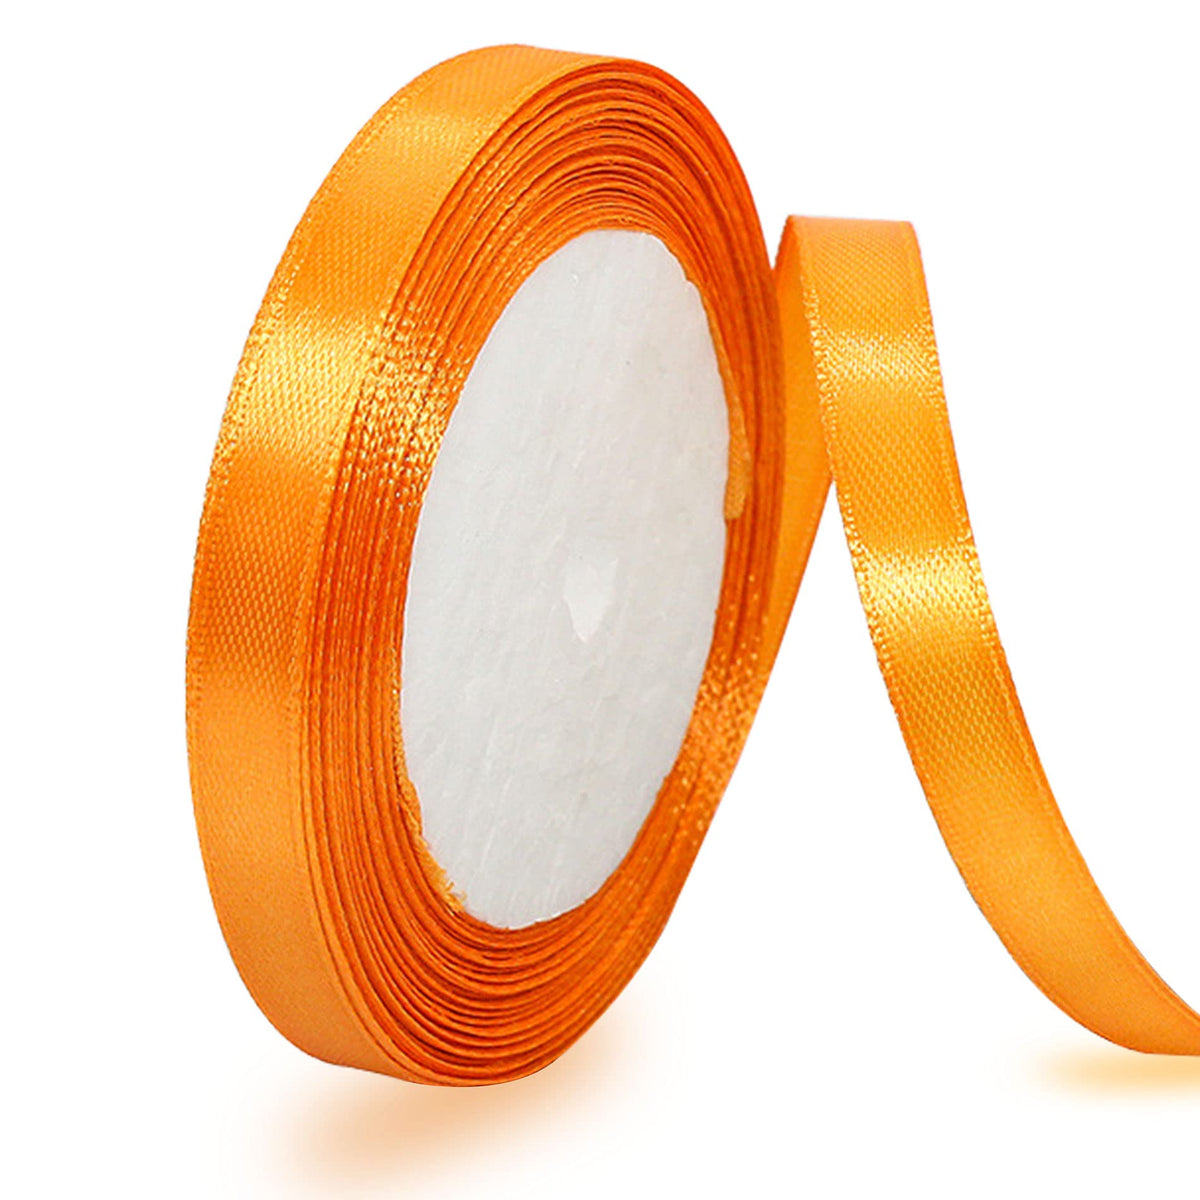 Orange Satin Ribbon 10mm, 23 Meters Solid Colors Fabric Ribbon for Crafting, Gift Wrapping, Balloons, DIY Sewing Project, Hair Bows and Cake Decoration